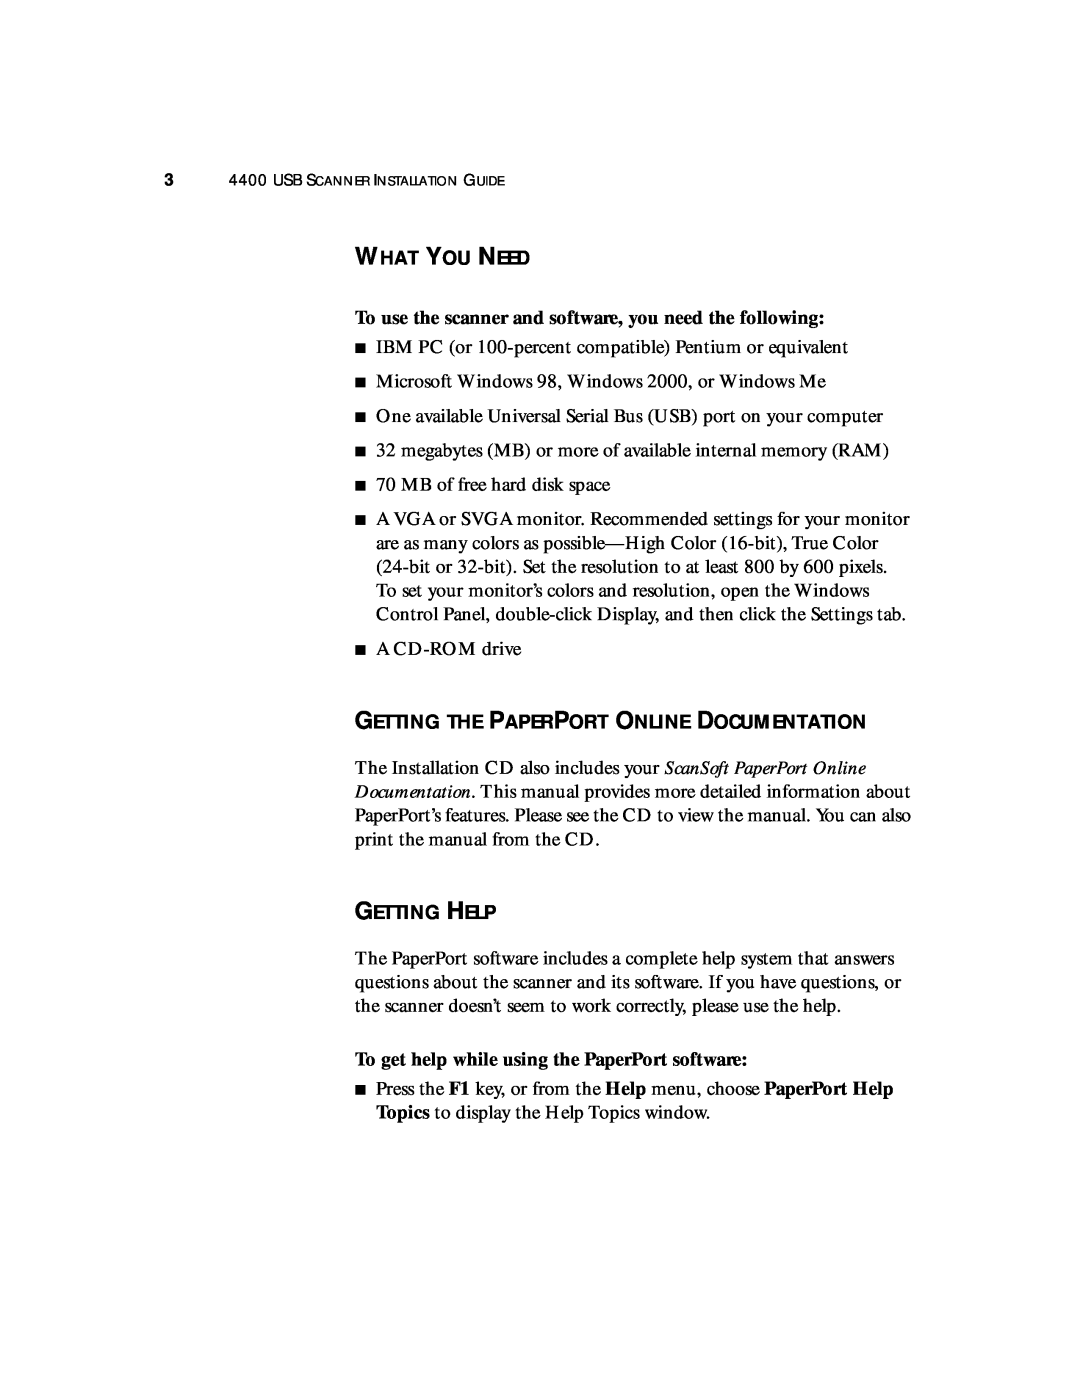 Visioneer 4400 manual What You Need, Getting Help, Getting The Paperport Online Documentation 